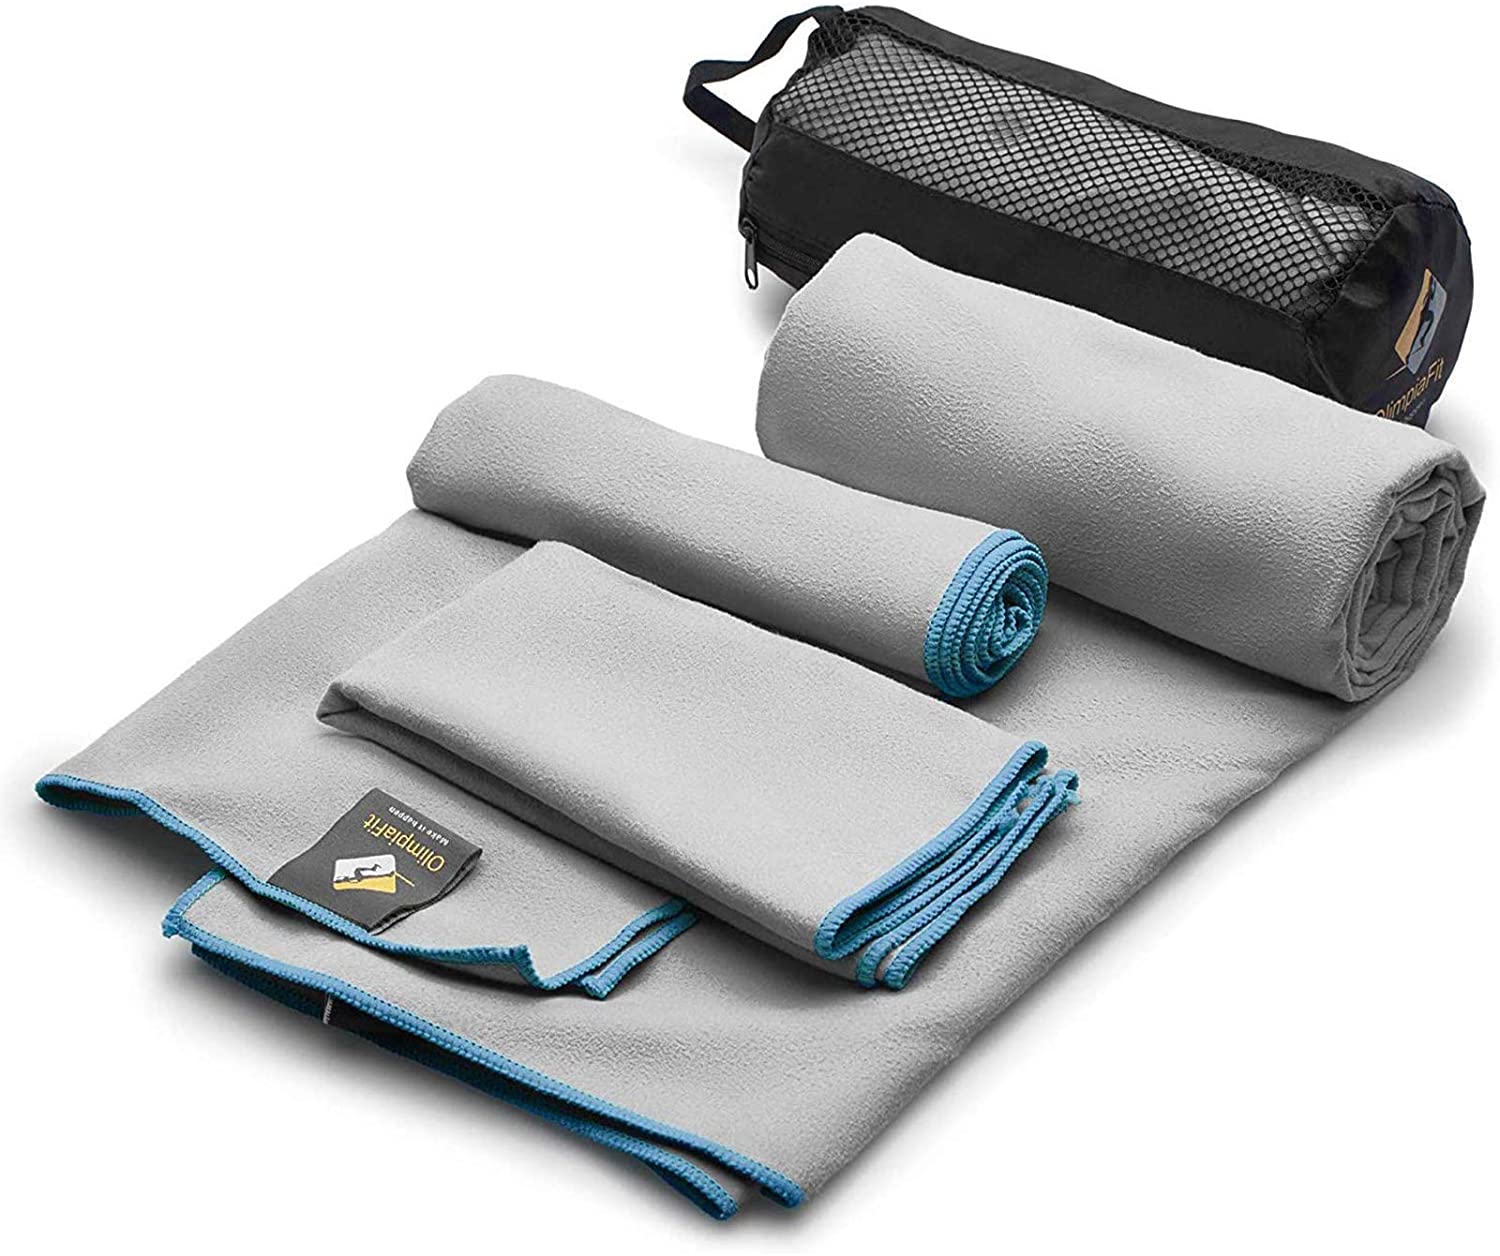 3 Size Options Youphoria Outdoors Microfiber Camping Towel Fast Drying Lightweight Quick Dry Travel Towel & Sport Towel 